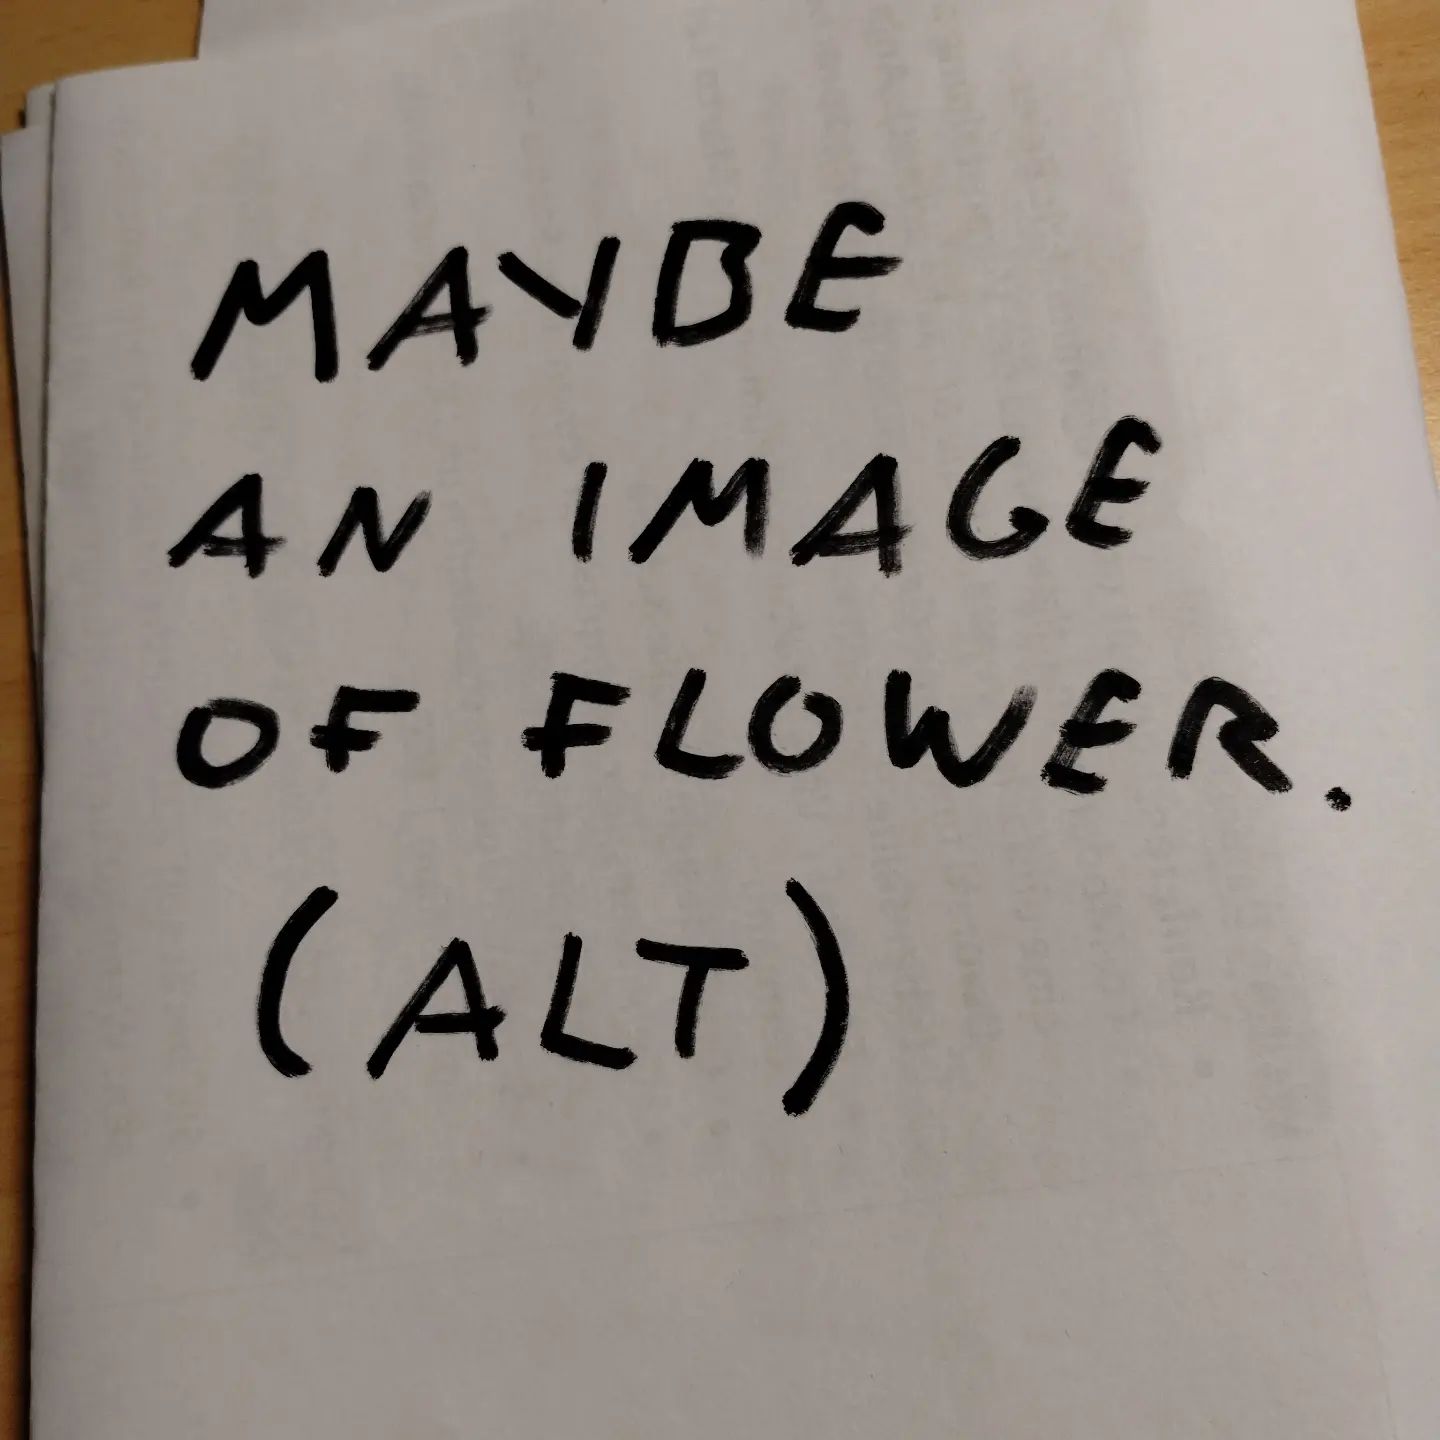 Photo of handwritten text on paper:	Maybe an image of flower.	(ALT)